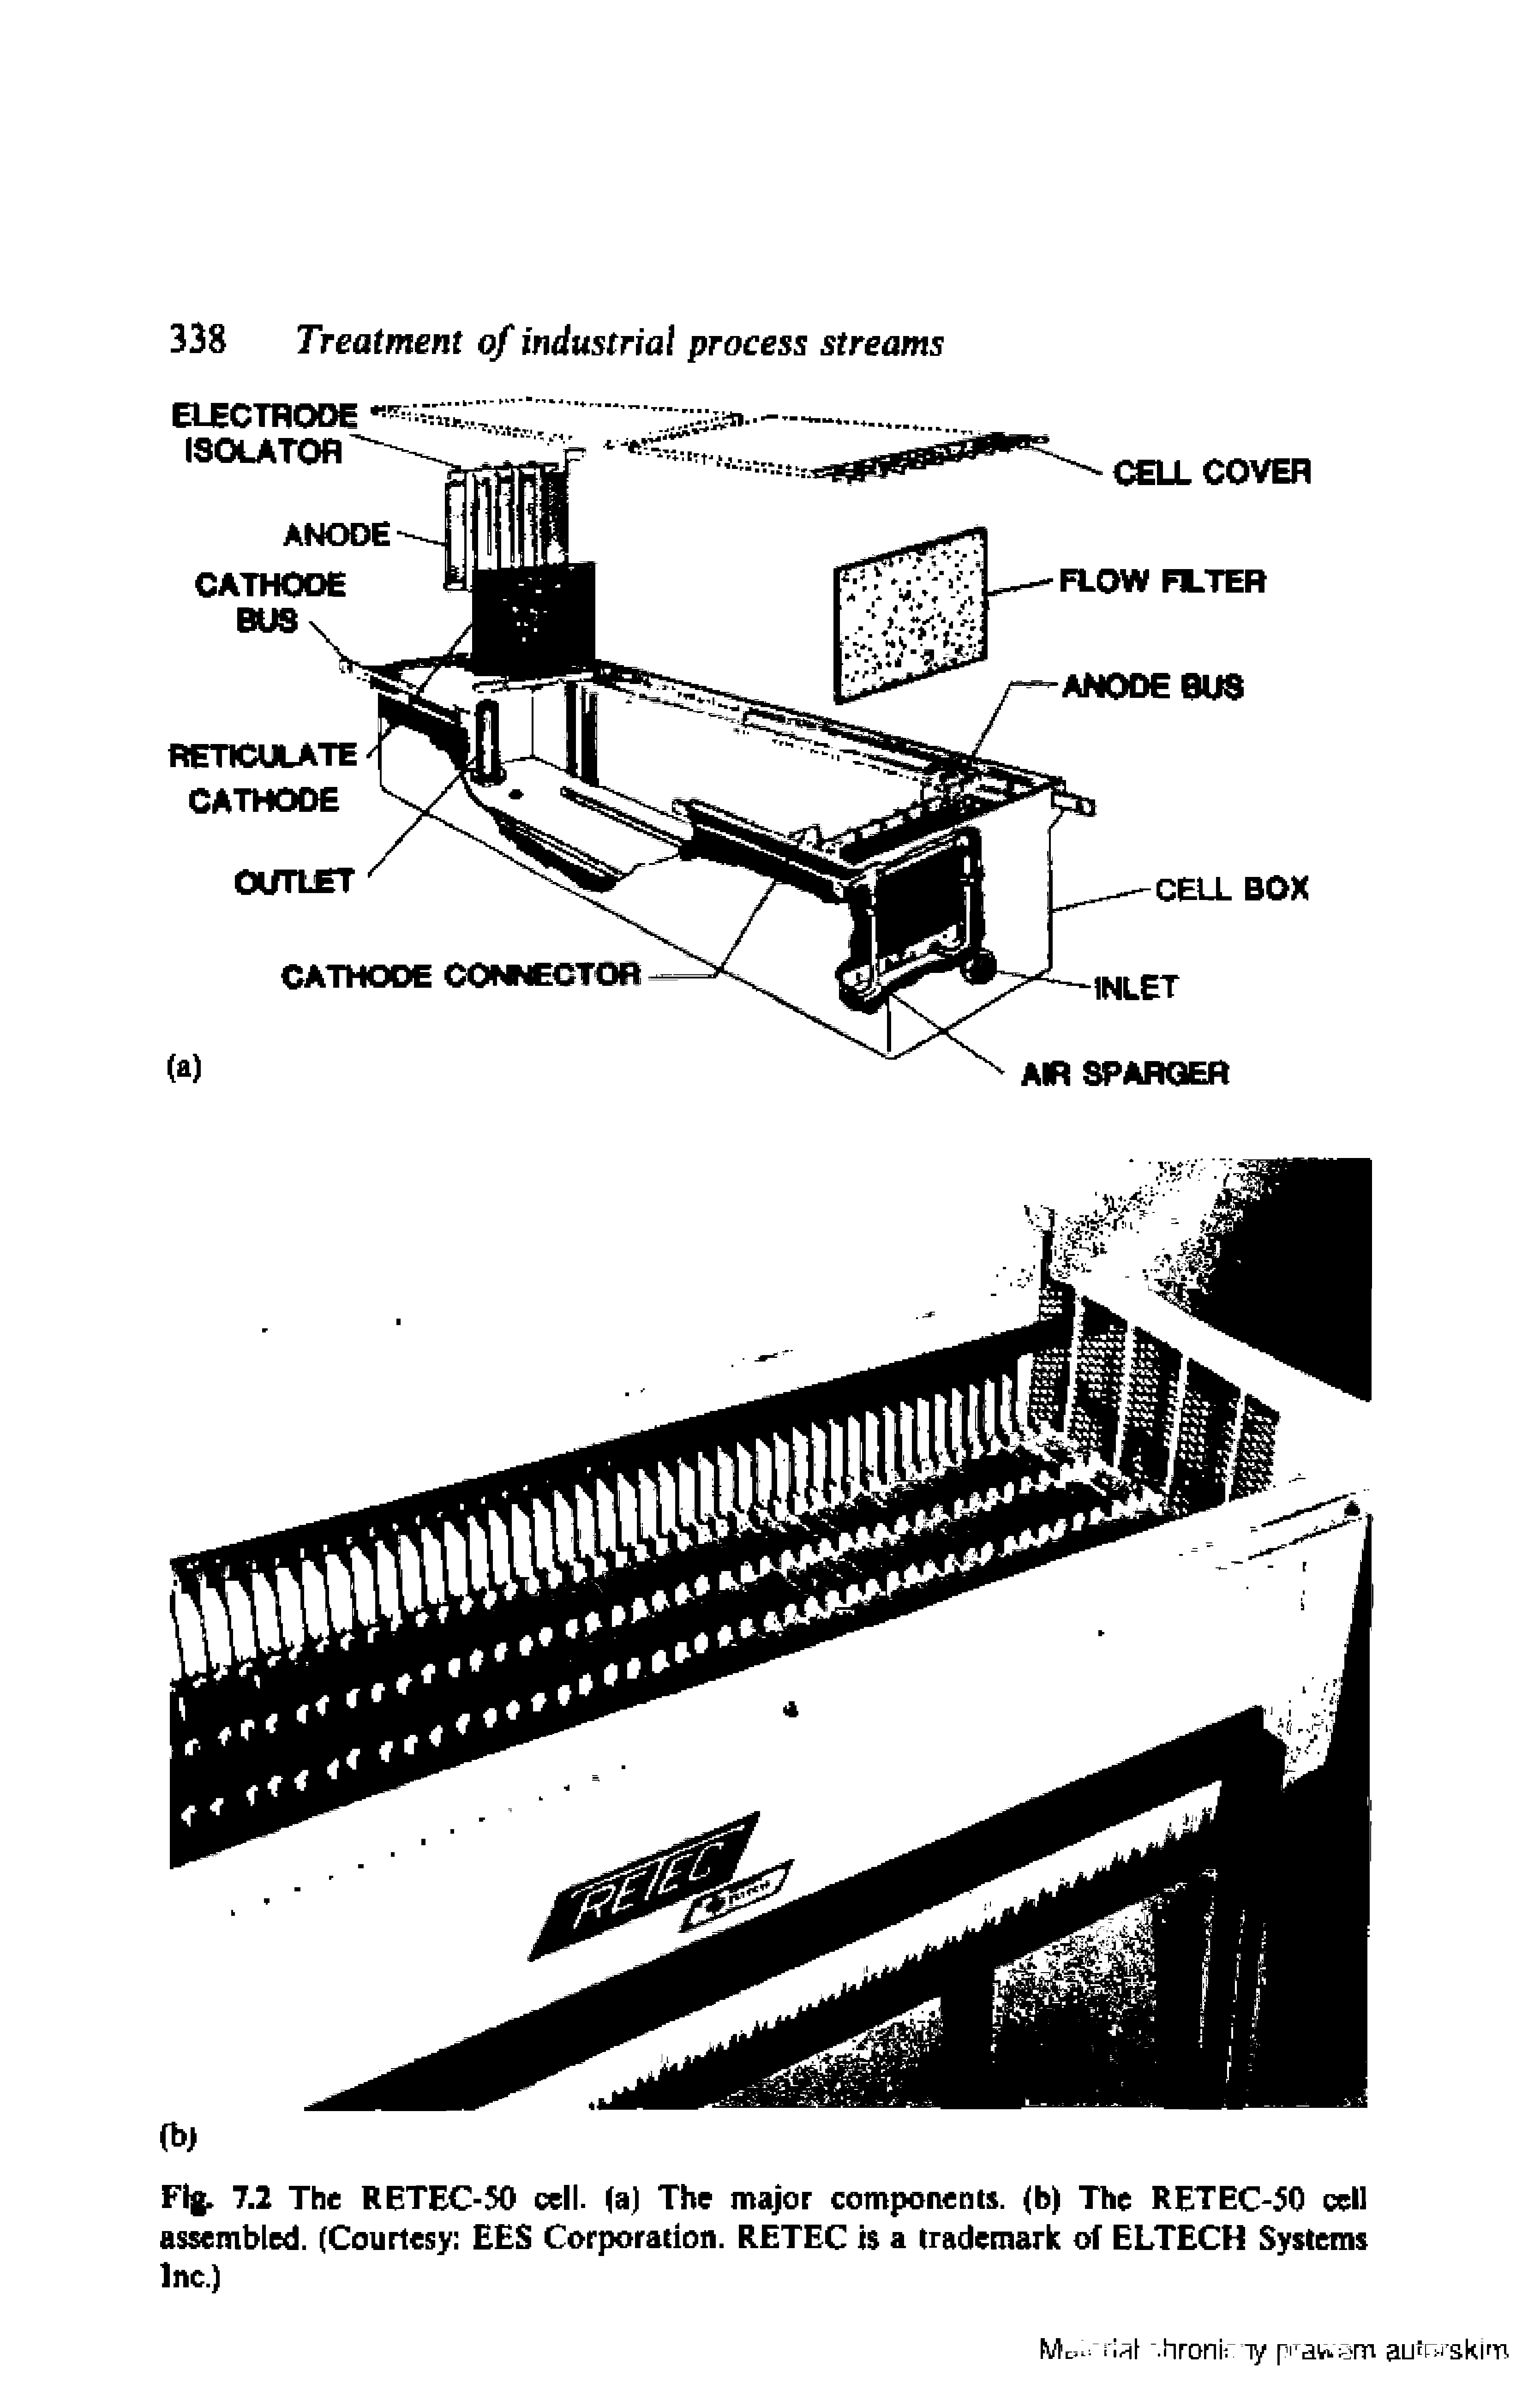 Fig. 7.2 The RETEC-50 cell, fa) The major components, (b) The RETEC-50 cell assembled. (Courtesy EES Corporation. RETEC t a trademark of ELTECH Systems Inc.)...